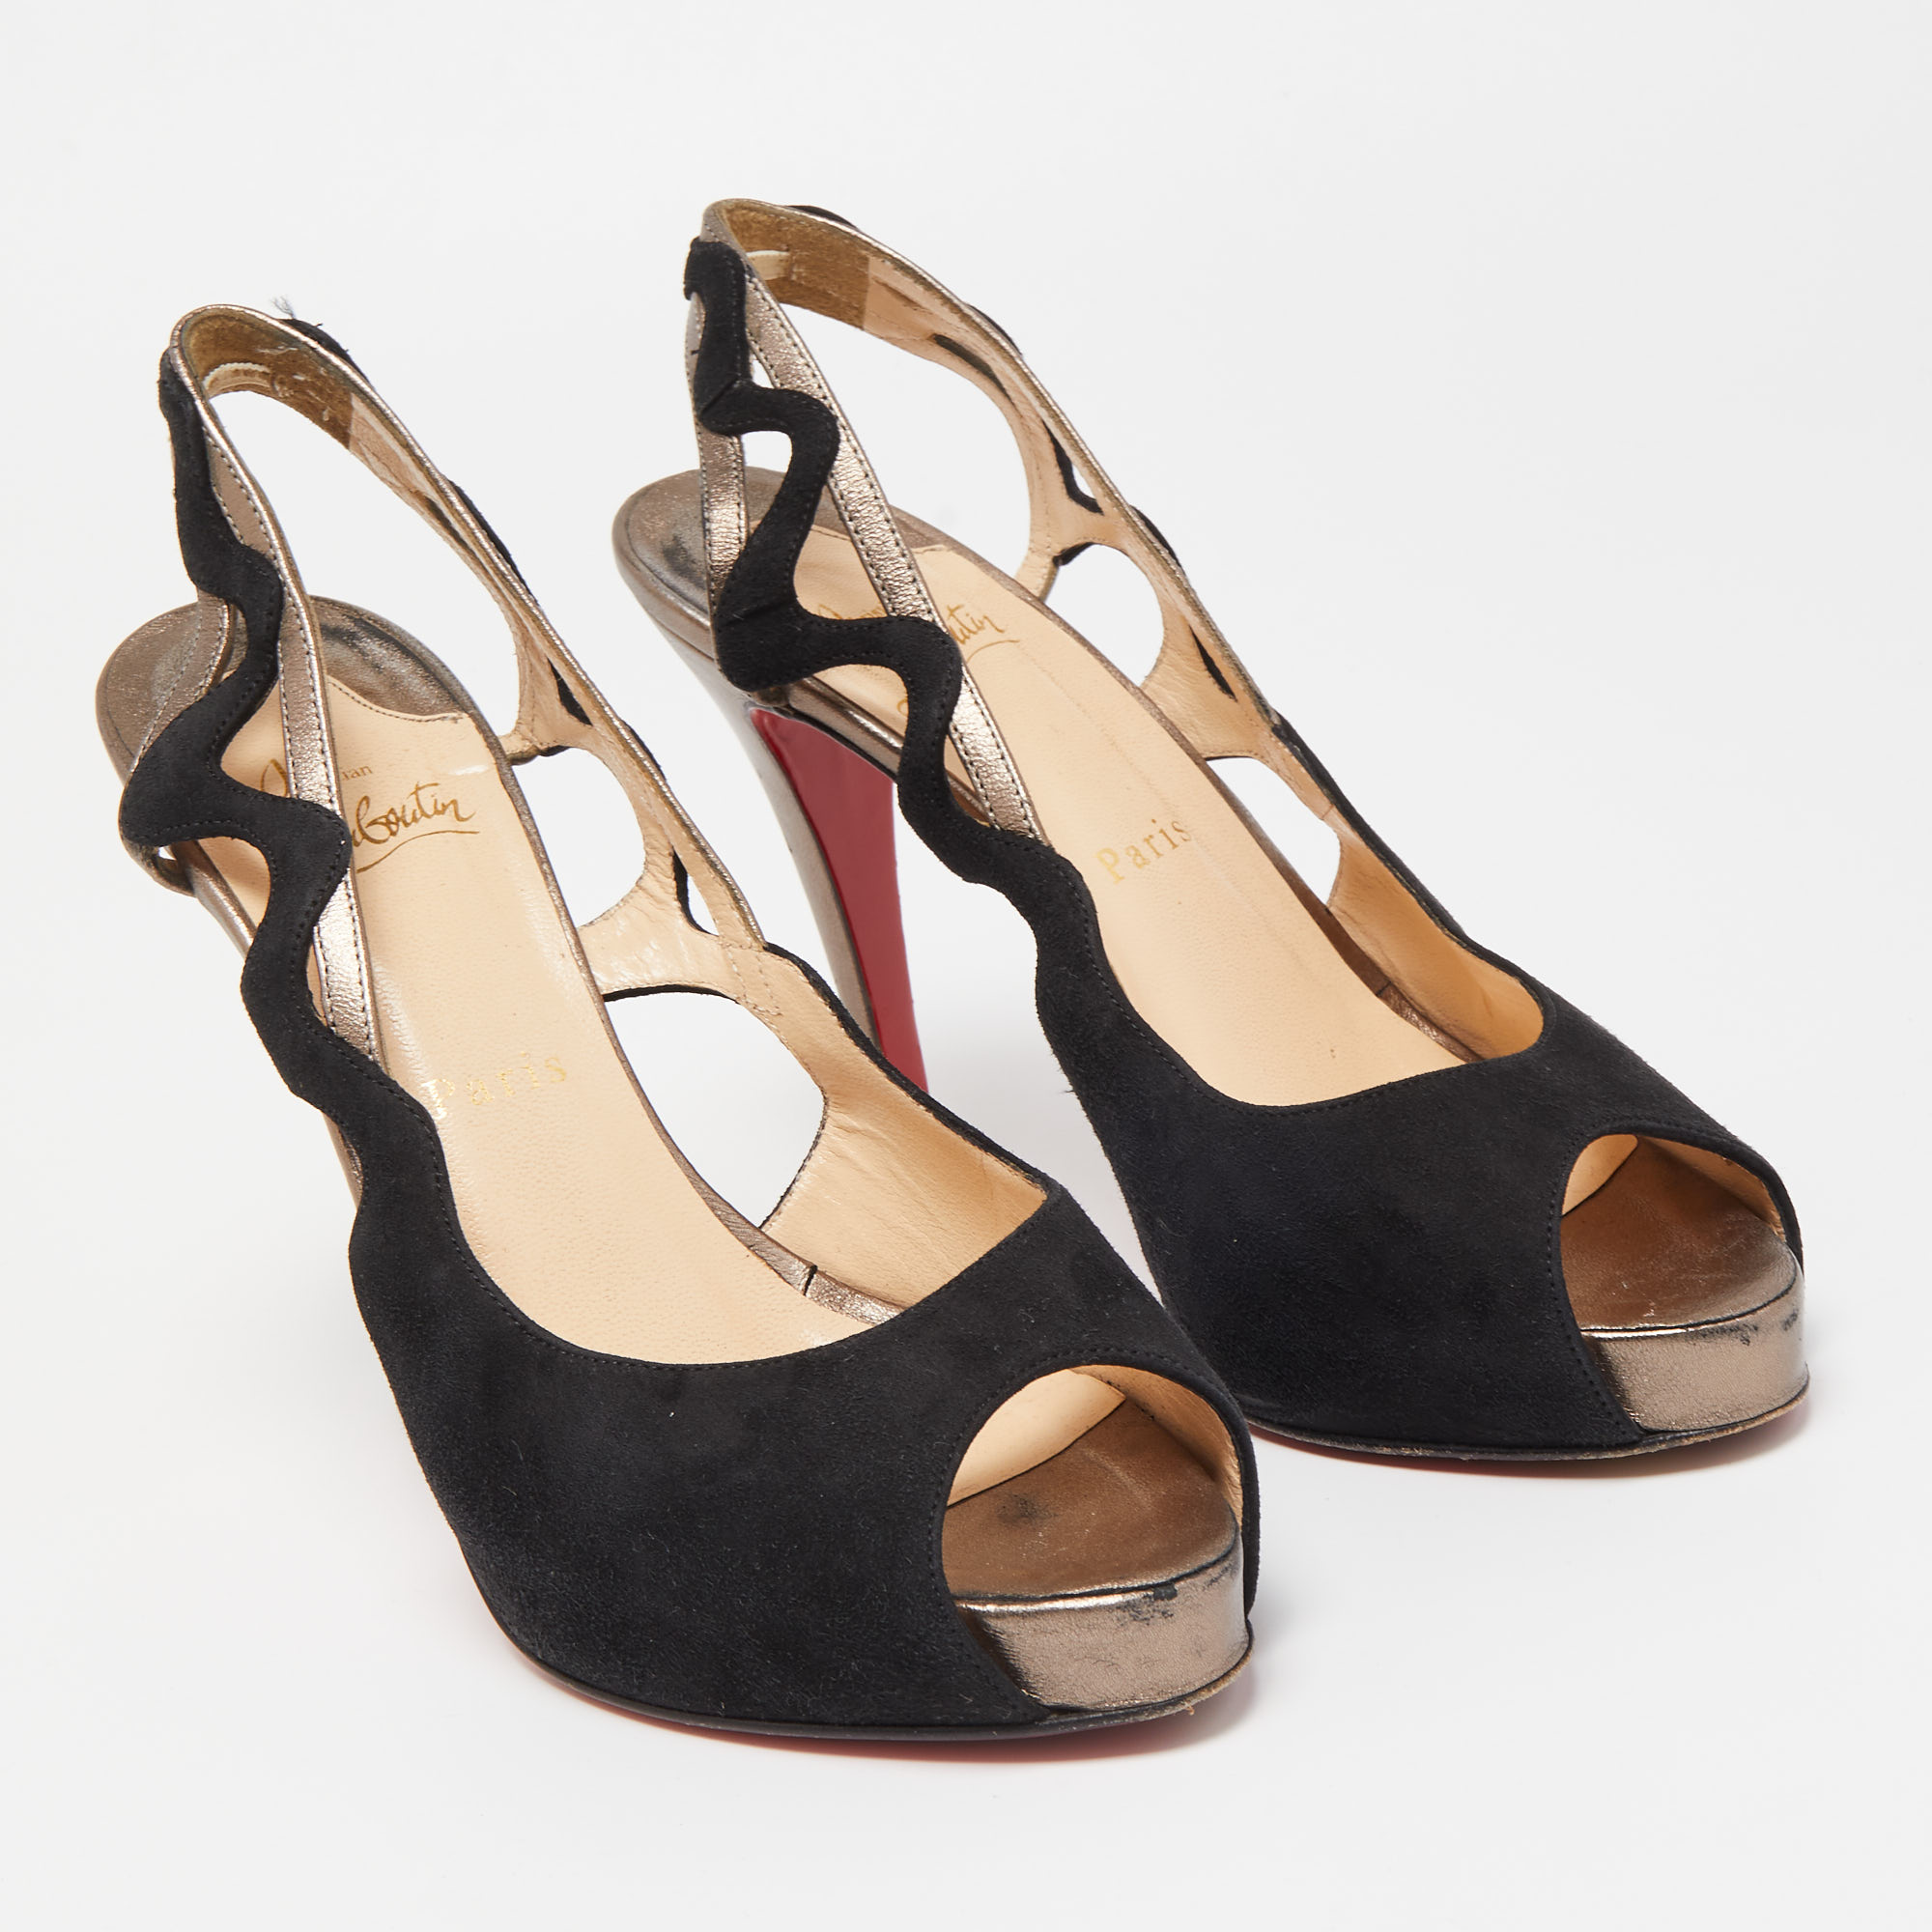 Christian Louboutin Black Suede And Leather Slingback Pumps Size 38.5